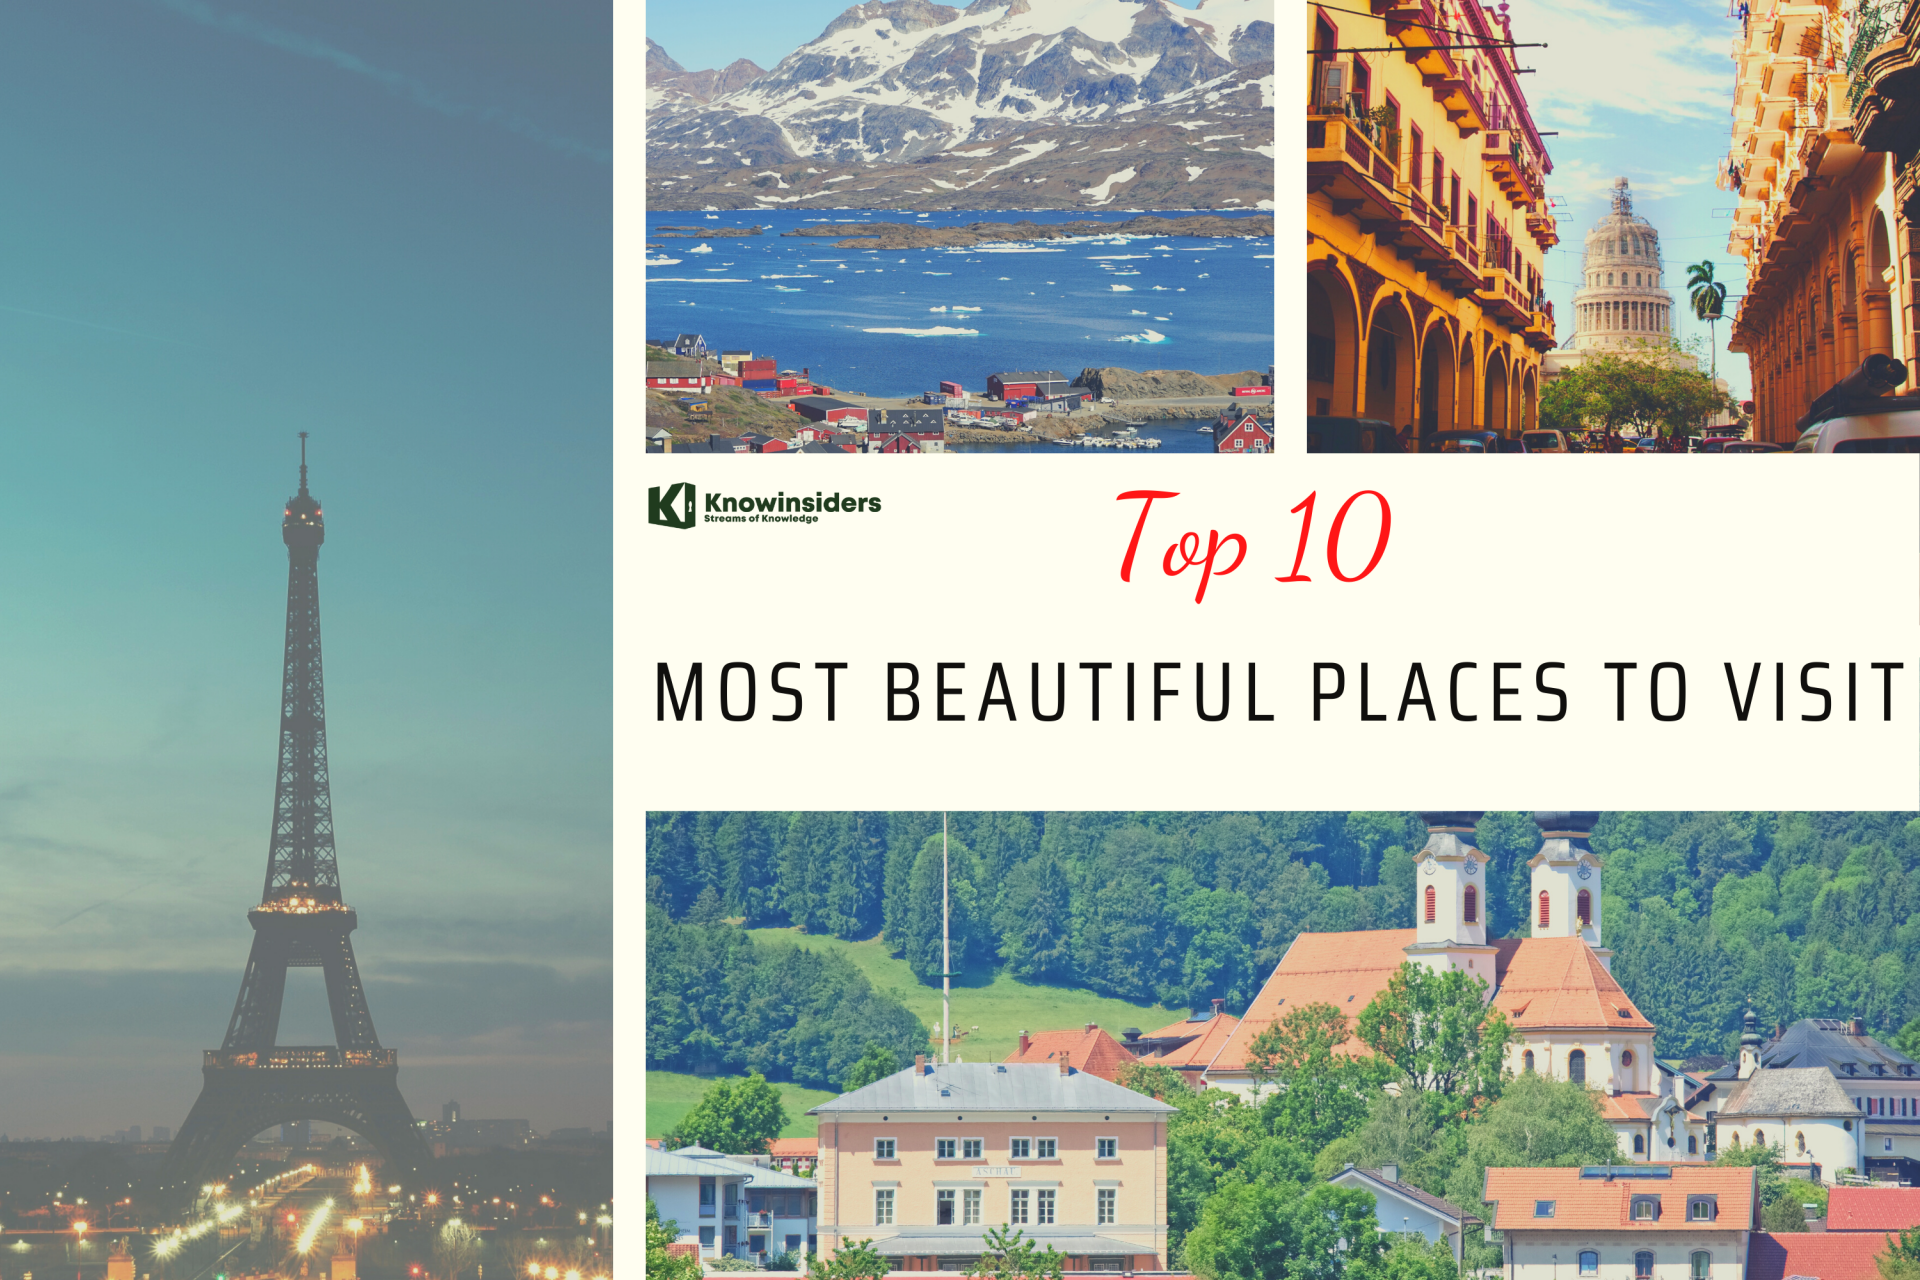 Top 10 Most Beautiful Places to Visit Around the World